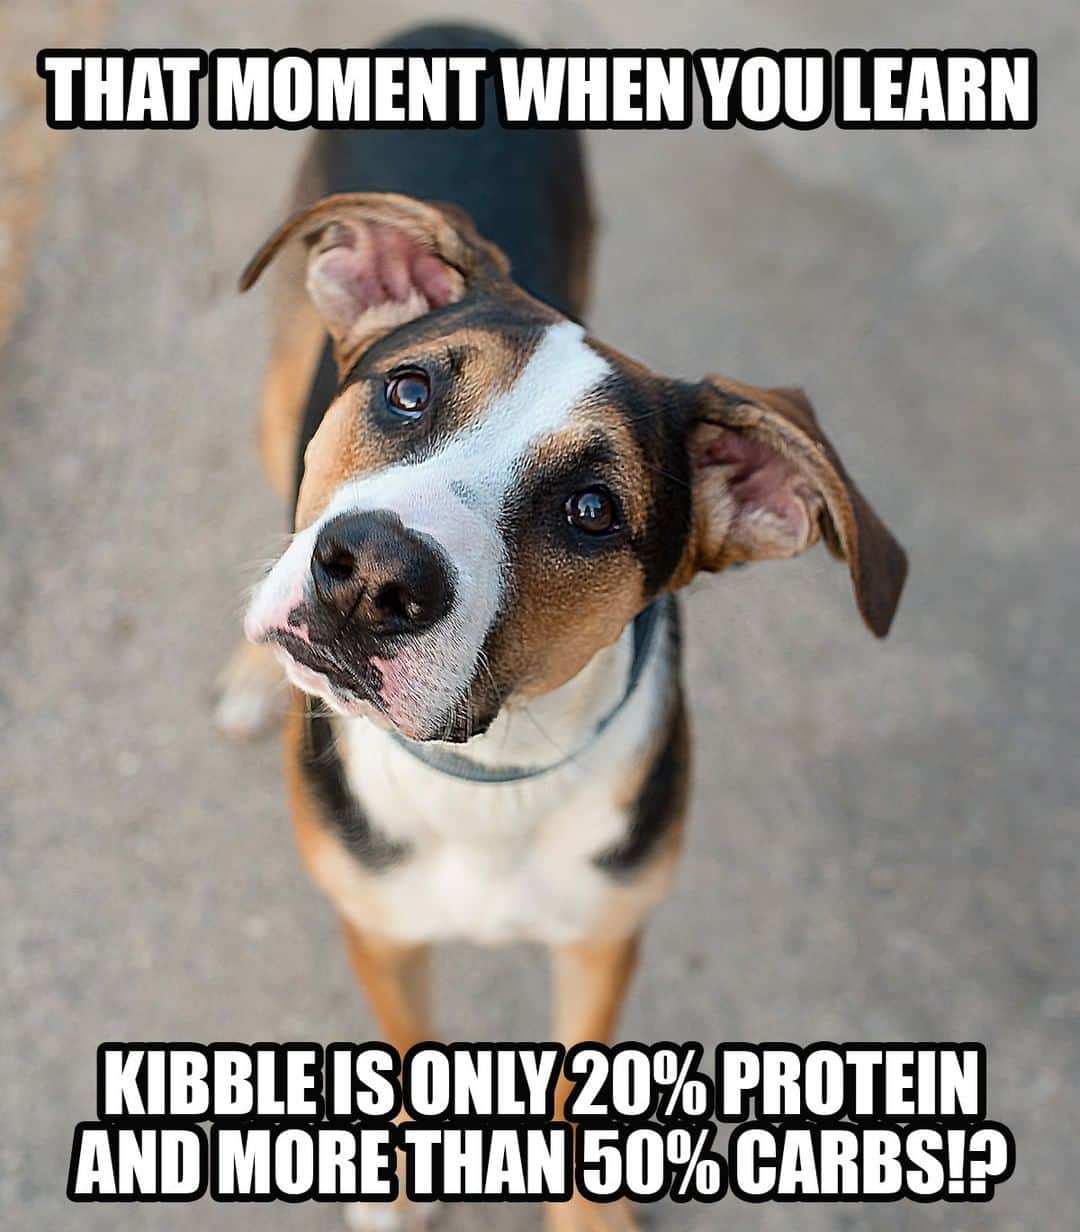 Animalsのインスタグラム：「👇 HOW TO BOOST YOUR DOG’S KIBBLE 👇  Many dog parents are surprised when they find out how little protein is in their dog’s food. A quick glance at your dog’s teeth proves that our pups we made to eat primarily meat, not grains.  In fact, if it weren’t for the animal fat they spray on kibble, most dogs wouldn’t eat it at all.  But let’s be honest too. Kibble is very convenient and affordable compared to canned or 100% fresh food diets.  Fortunately, you don't have to completely abandon kibble in order to begin feeding your dog a more bilogically appropriate diet.  In recent years, freeze dried meat toppers have EXPLODED in popularity. You simply sprinkle a bit over your dog's existing food.  Our team recently tried the new 'Happy, Healthy' brand which comes in chicken or beef, and is packed probiotics, blueberries, carrots and kale too. To say our dogs went CRAZY for it is an understatement!!! Click the profile link in @iheartdogscom to learn more!」